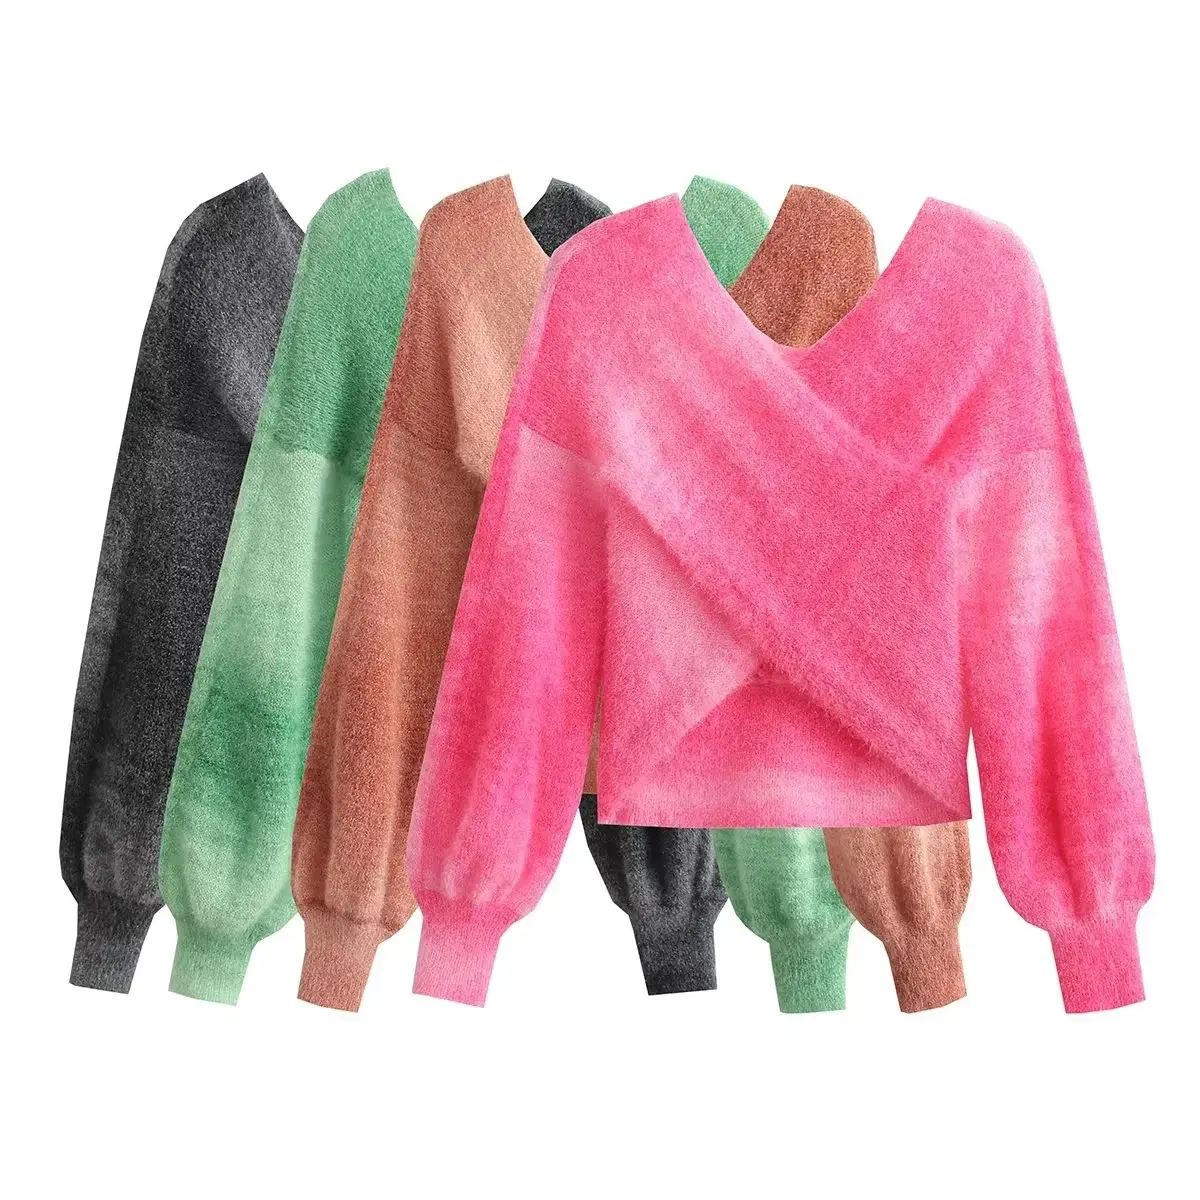 Designer Autumn V-Neck Loose Knitwear Long Sleeve Custom Knit Sweater Is Knitted From A Fuzzy Mohair-Blend Women Crop Sweater